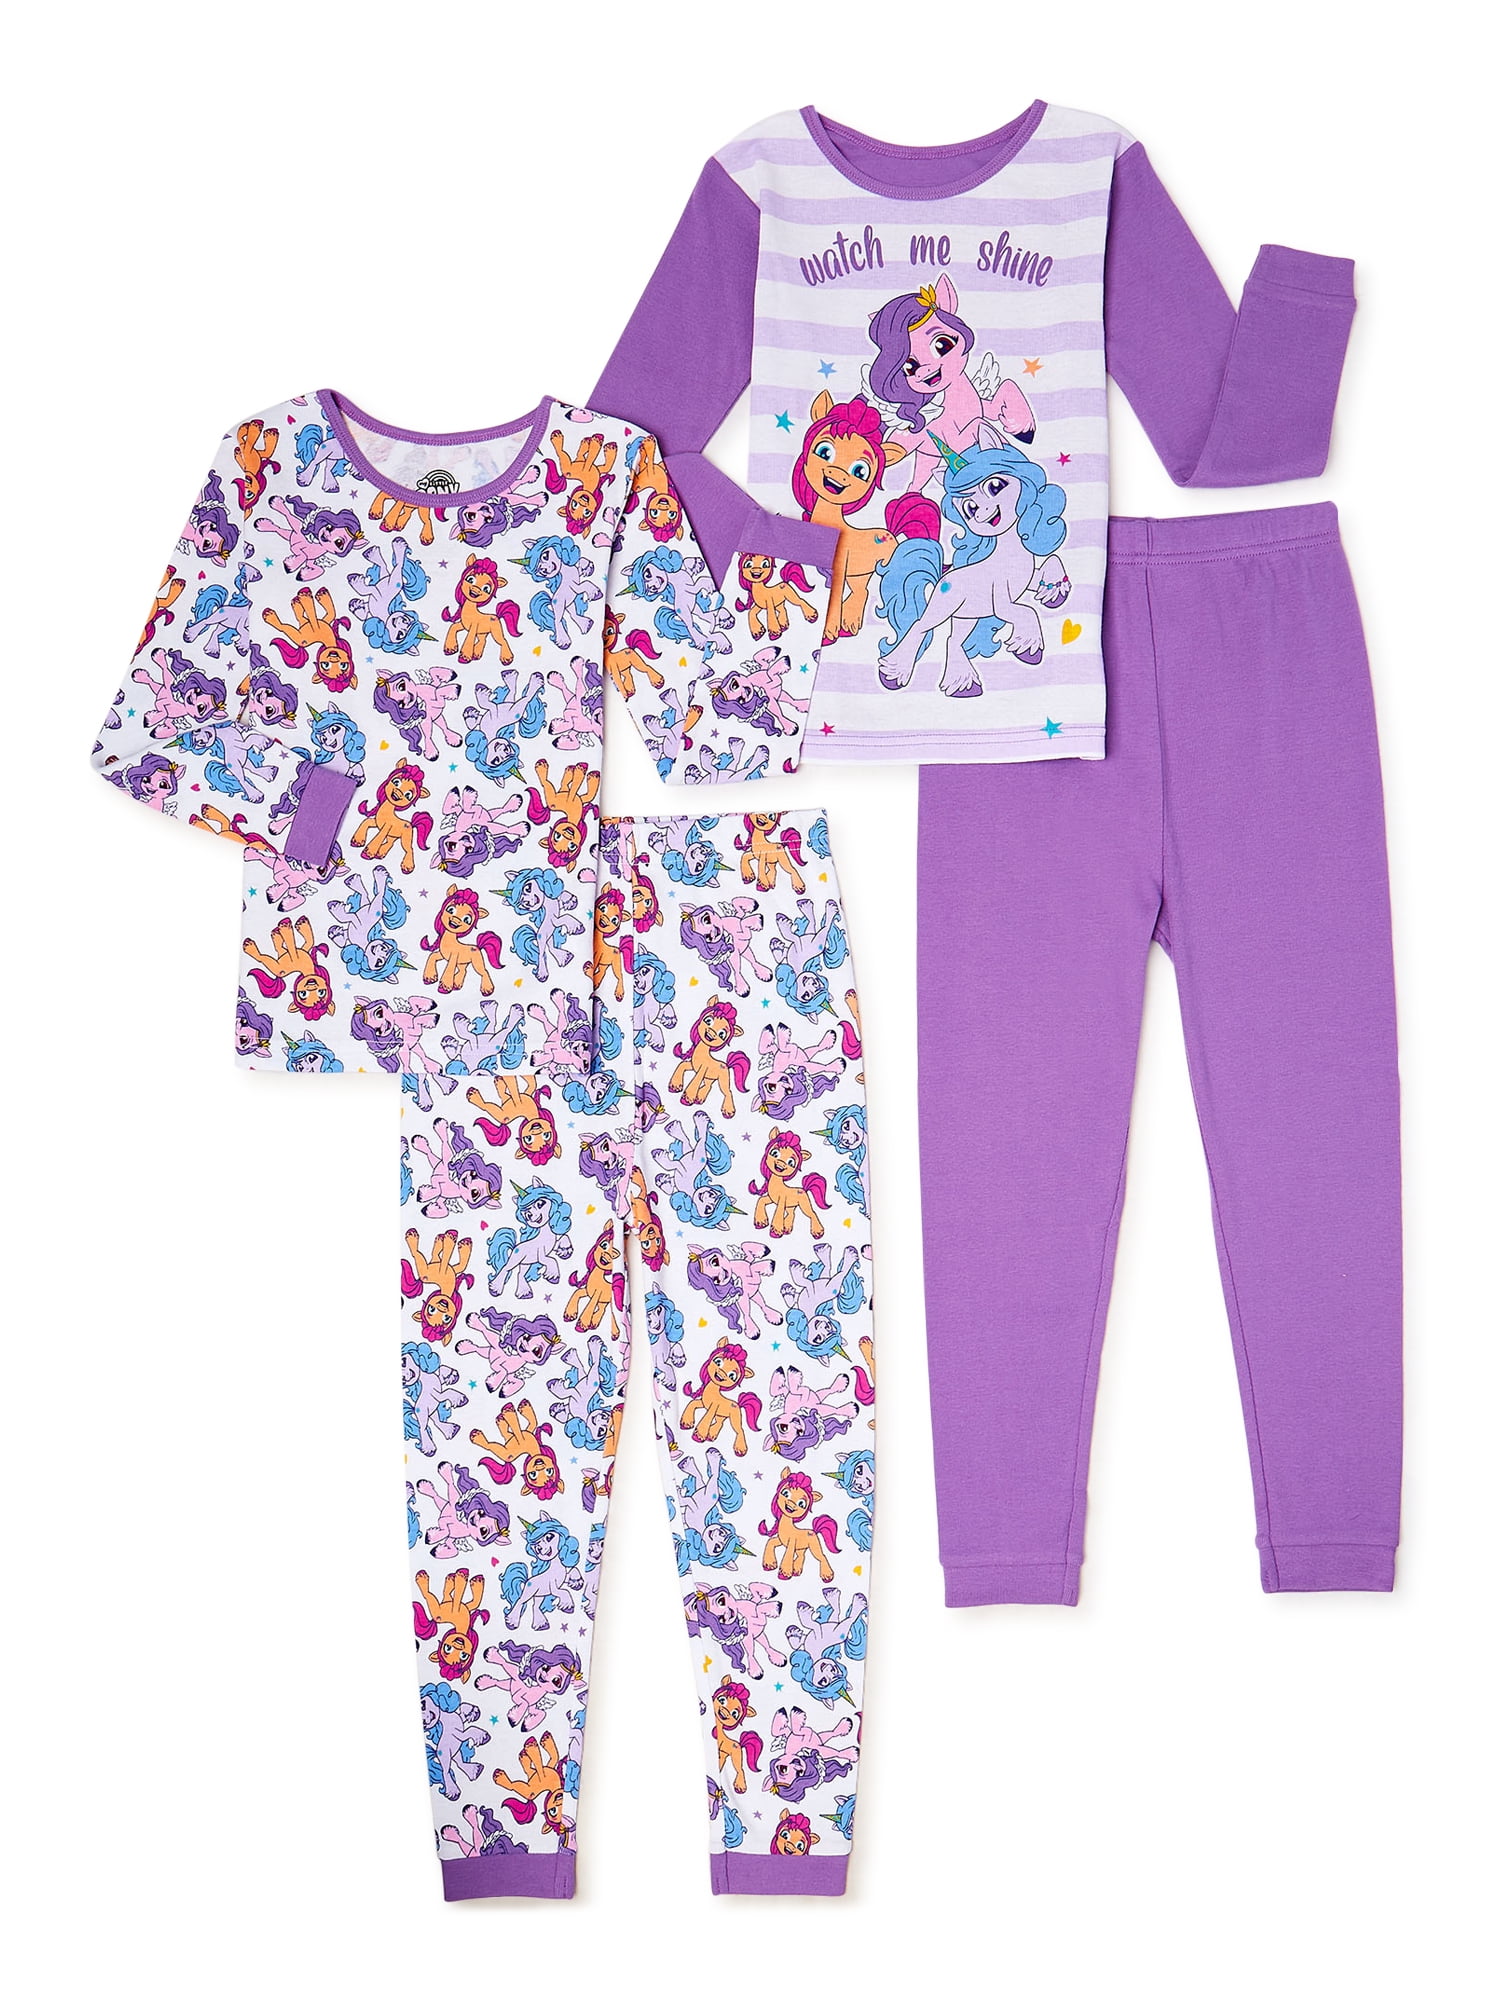 My Little Pony Toddler Girls Forever Happy 2pc Pajama Pant Set Size 2T 3T 4T $36 